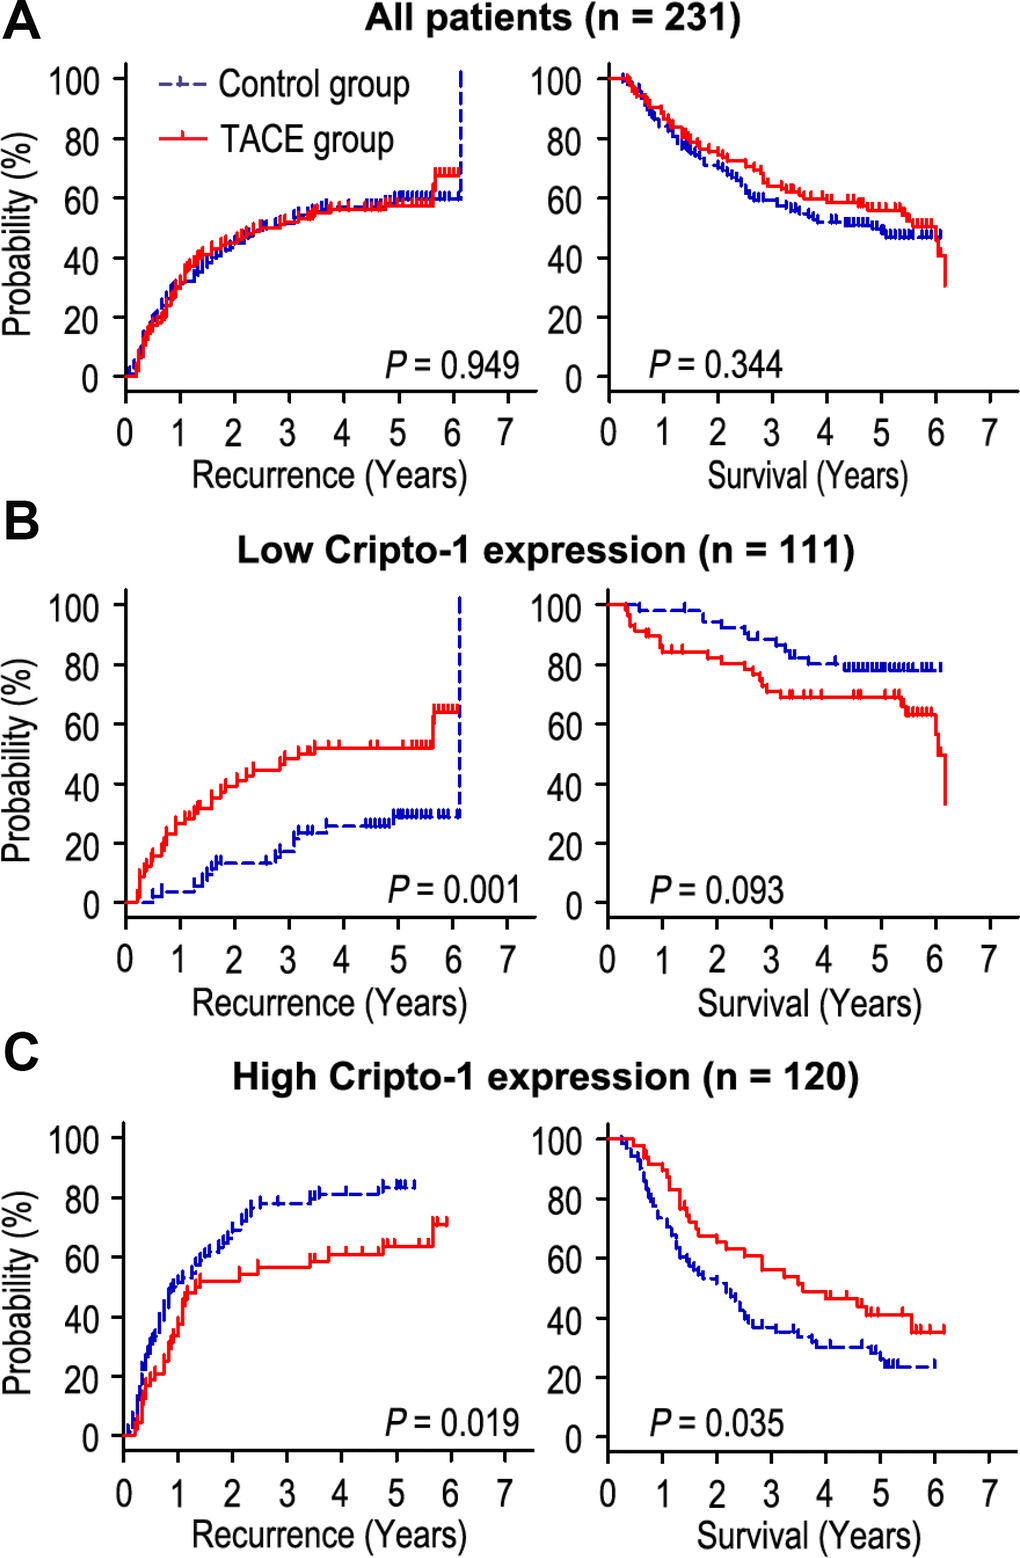 Prognostic significance of adjuvant TACE in HCC patients according to Cripto-1 expression. Adjuvant TACE could not increase the OS or TTR times in all HCC patients (A). Kaplan-Meier analysis of the association between adjuvant TACE therapy and OS/TTR in patients with low Cripto-1 expression (B) and high Cripto-1 expression (C).